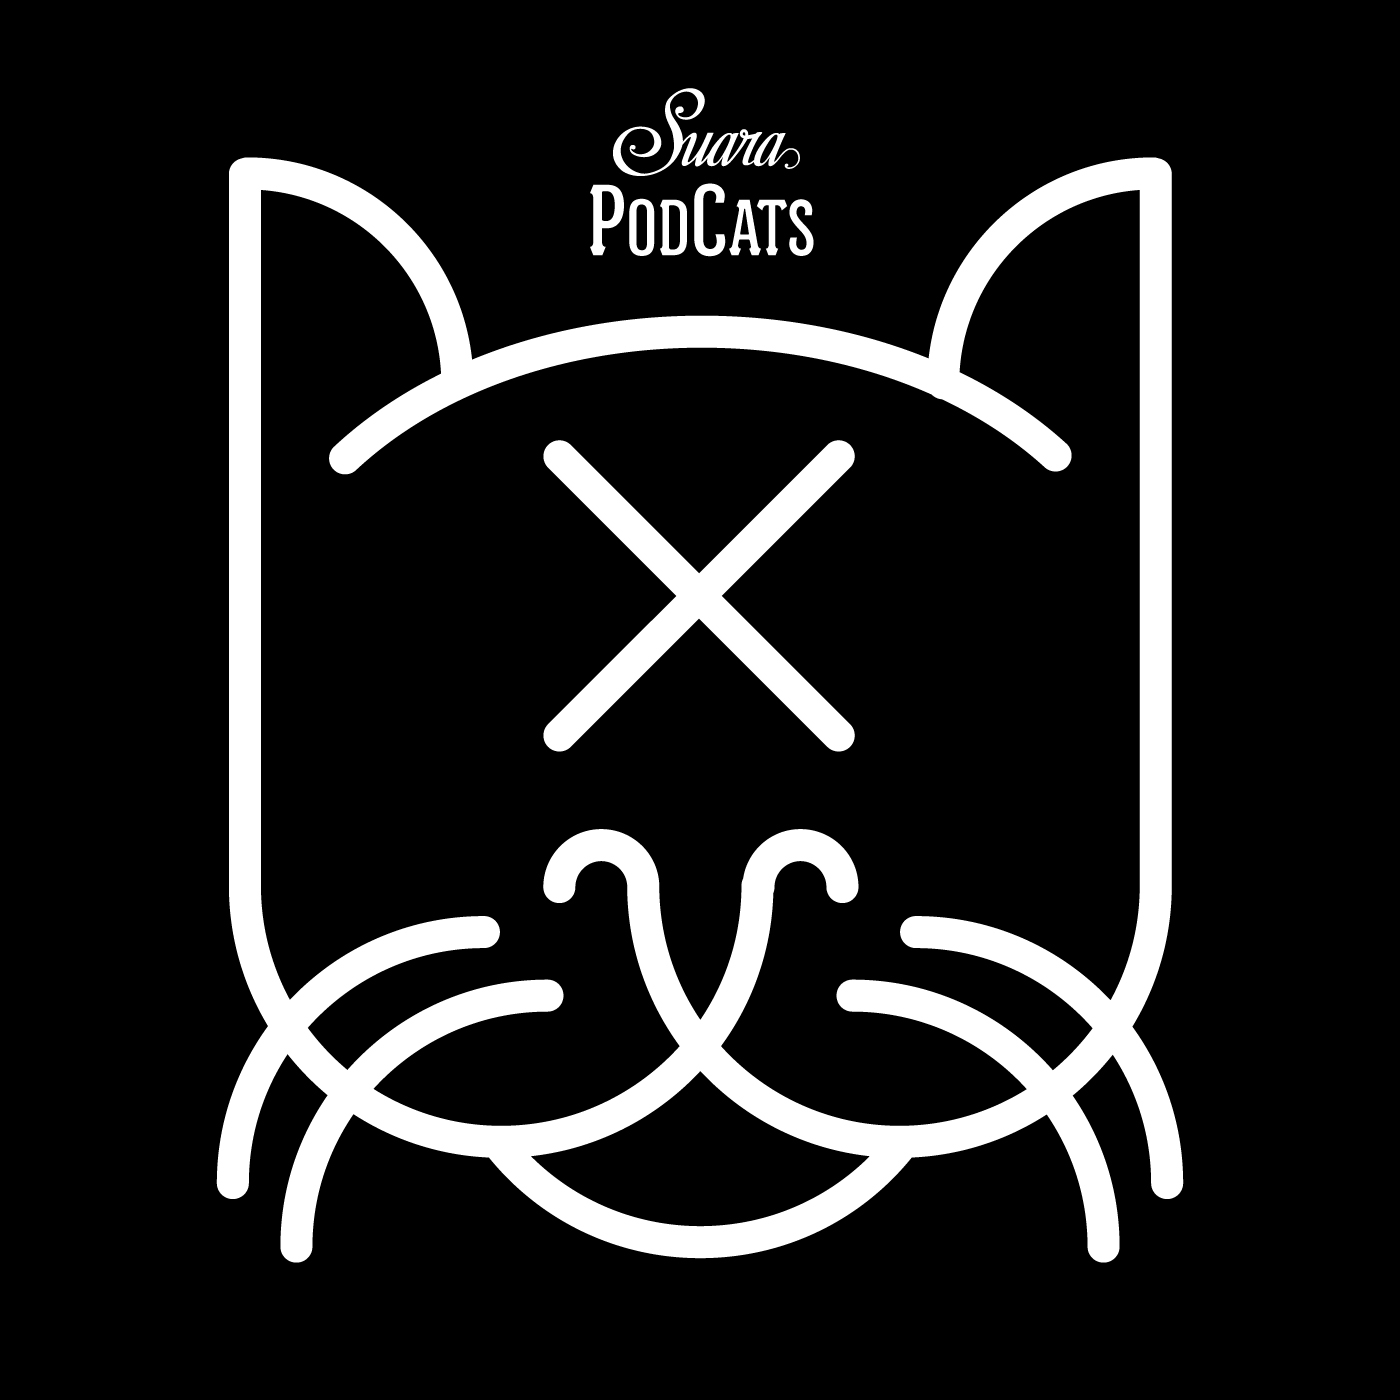 Delta Podcasts - Suara PodCats by Coyu (25.06.2018)